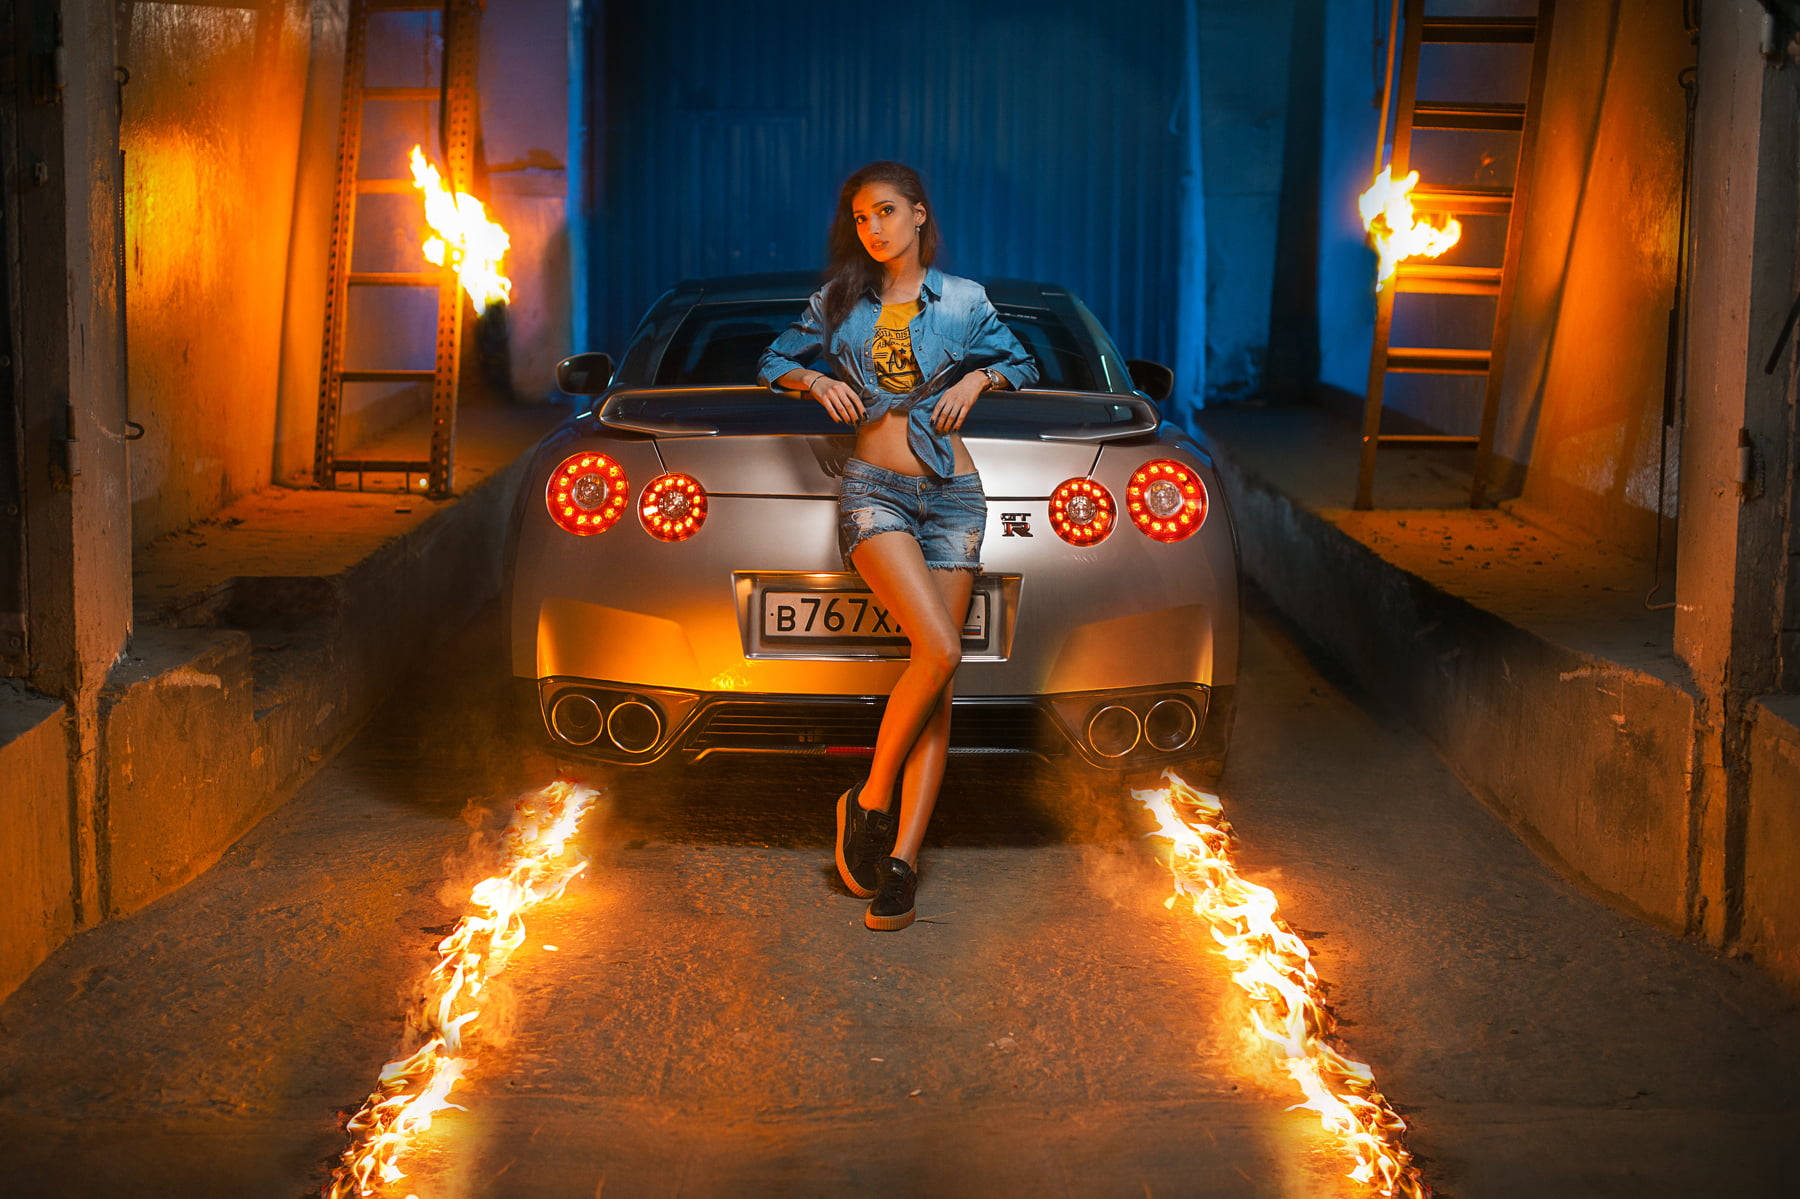 Fire Car In Garage With Woman Wallpaper